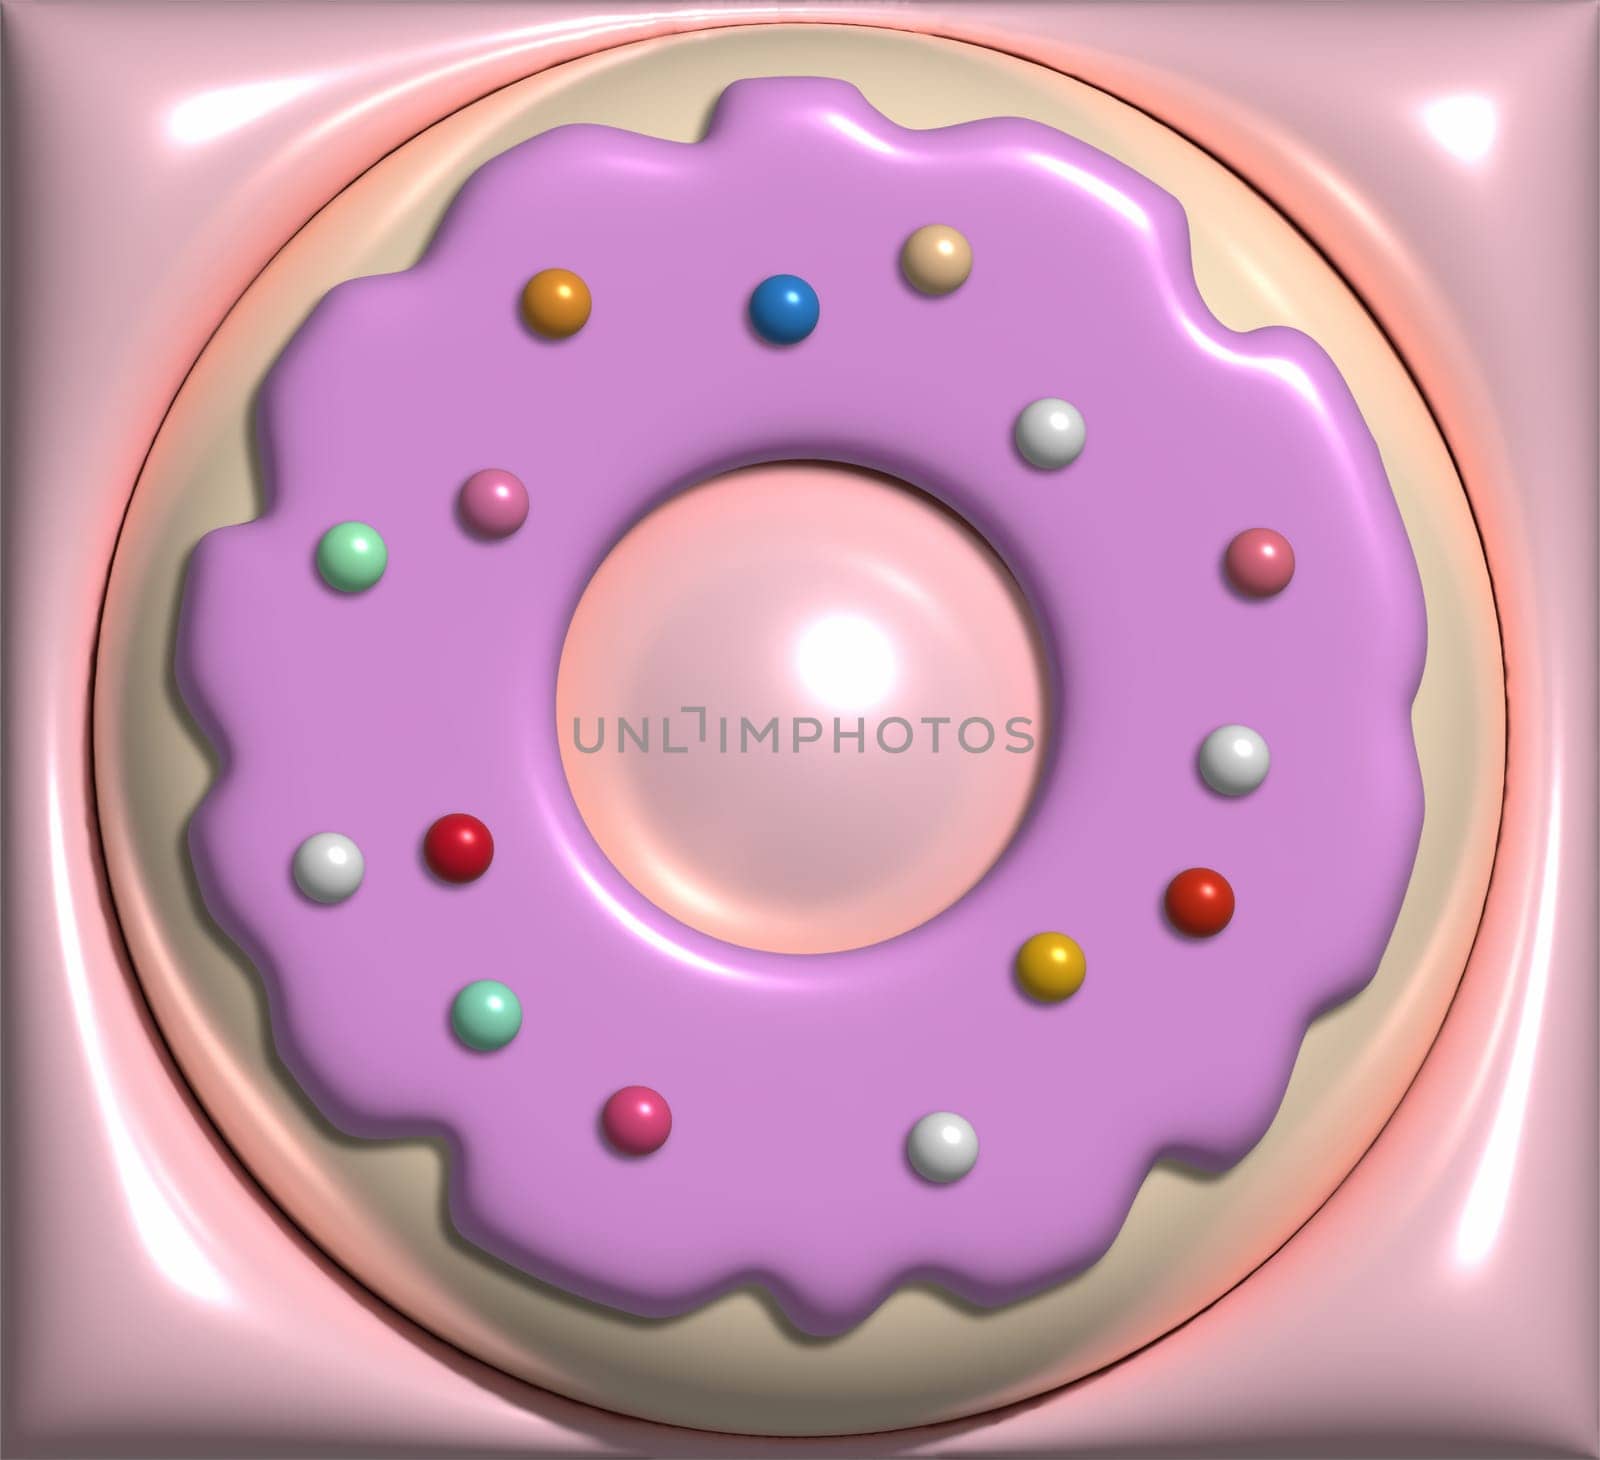 Round donut with pink icing and sprinkles, 3D rendering illustration